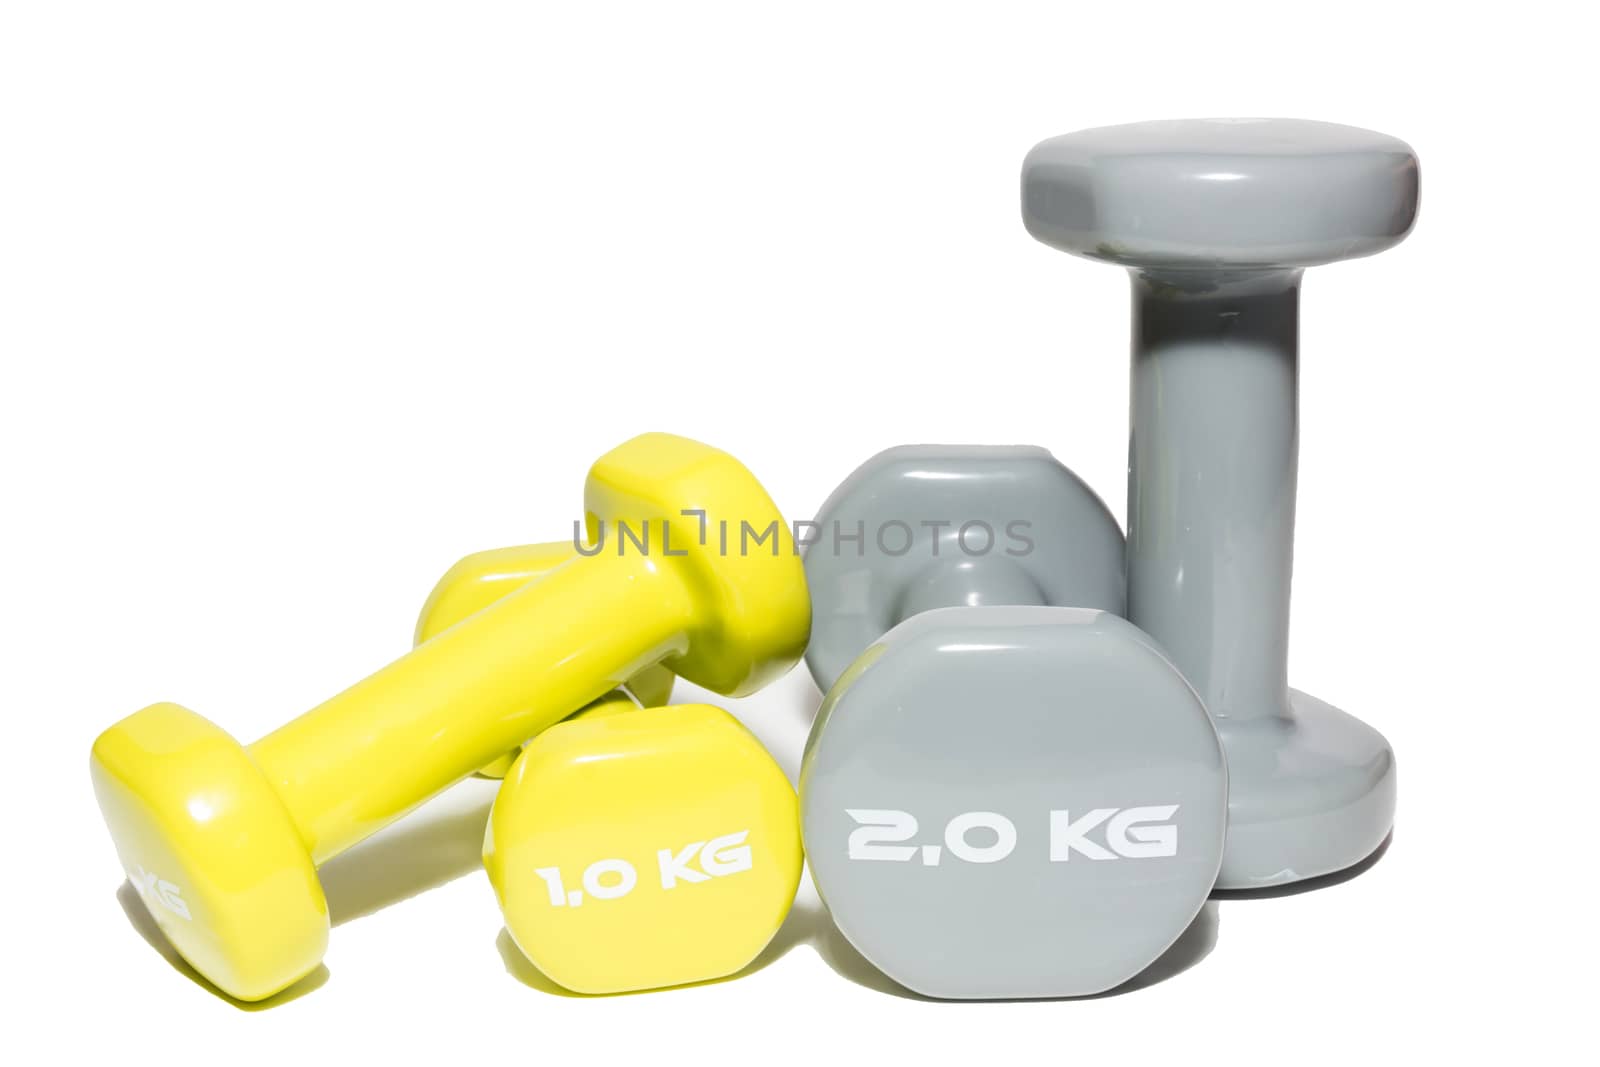 The photo shows a dumbbell on a white background